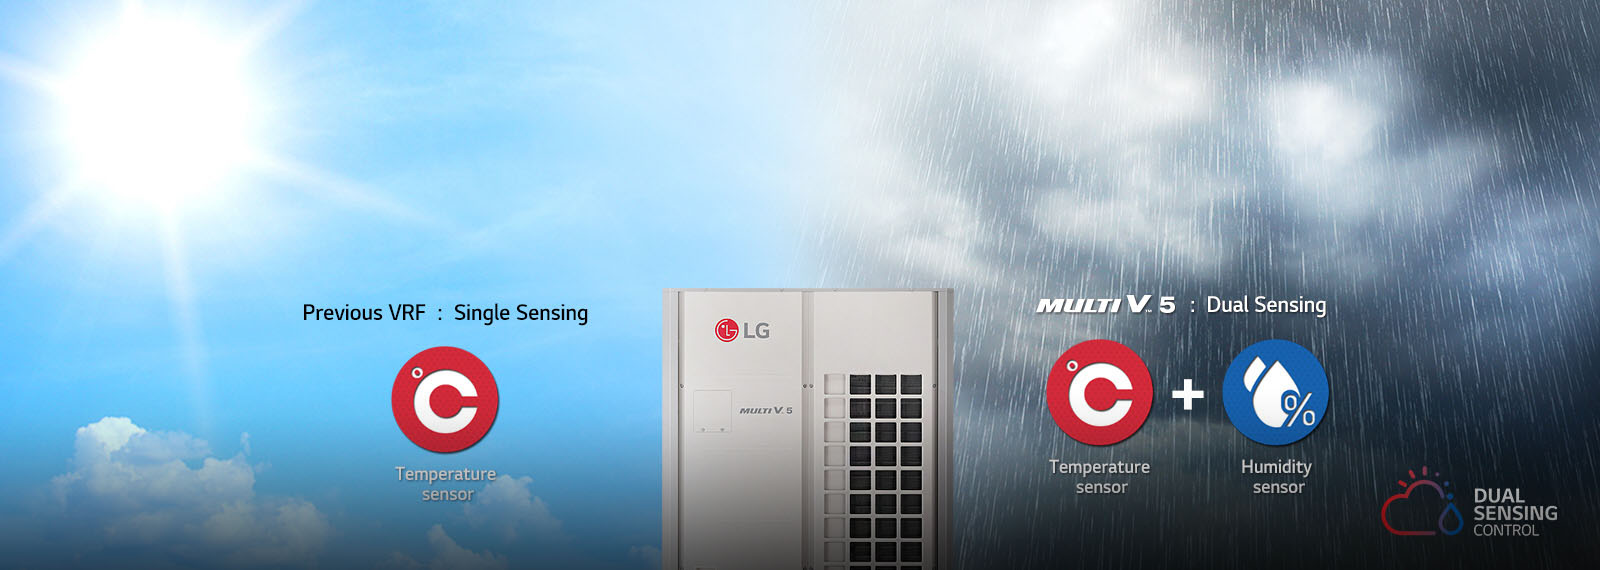 LG provides solutions that help cities keep cool without heating up the planet